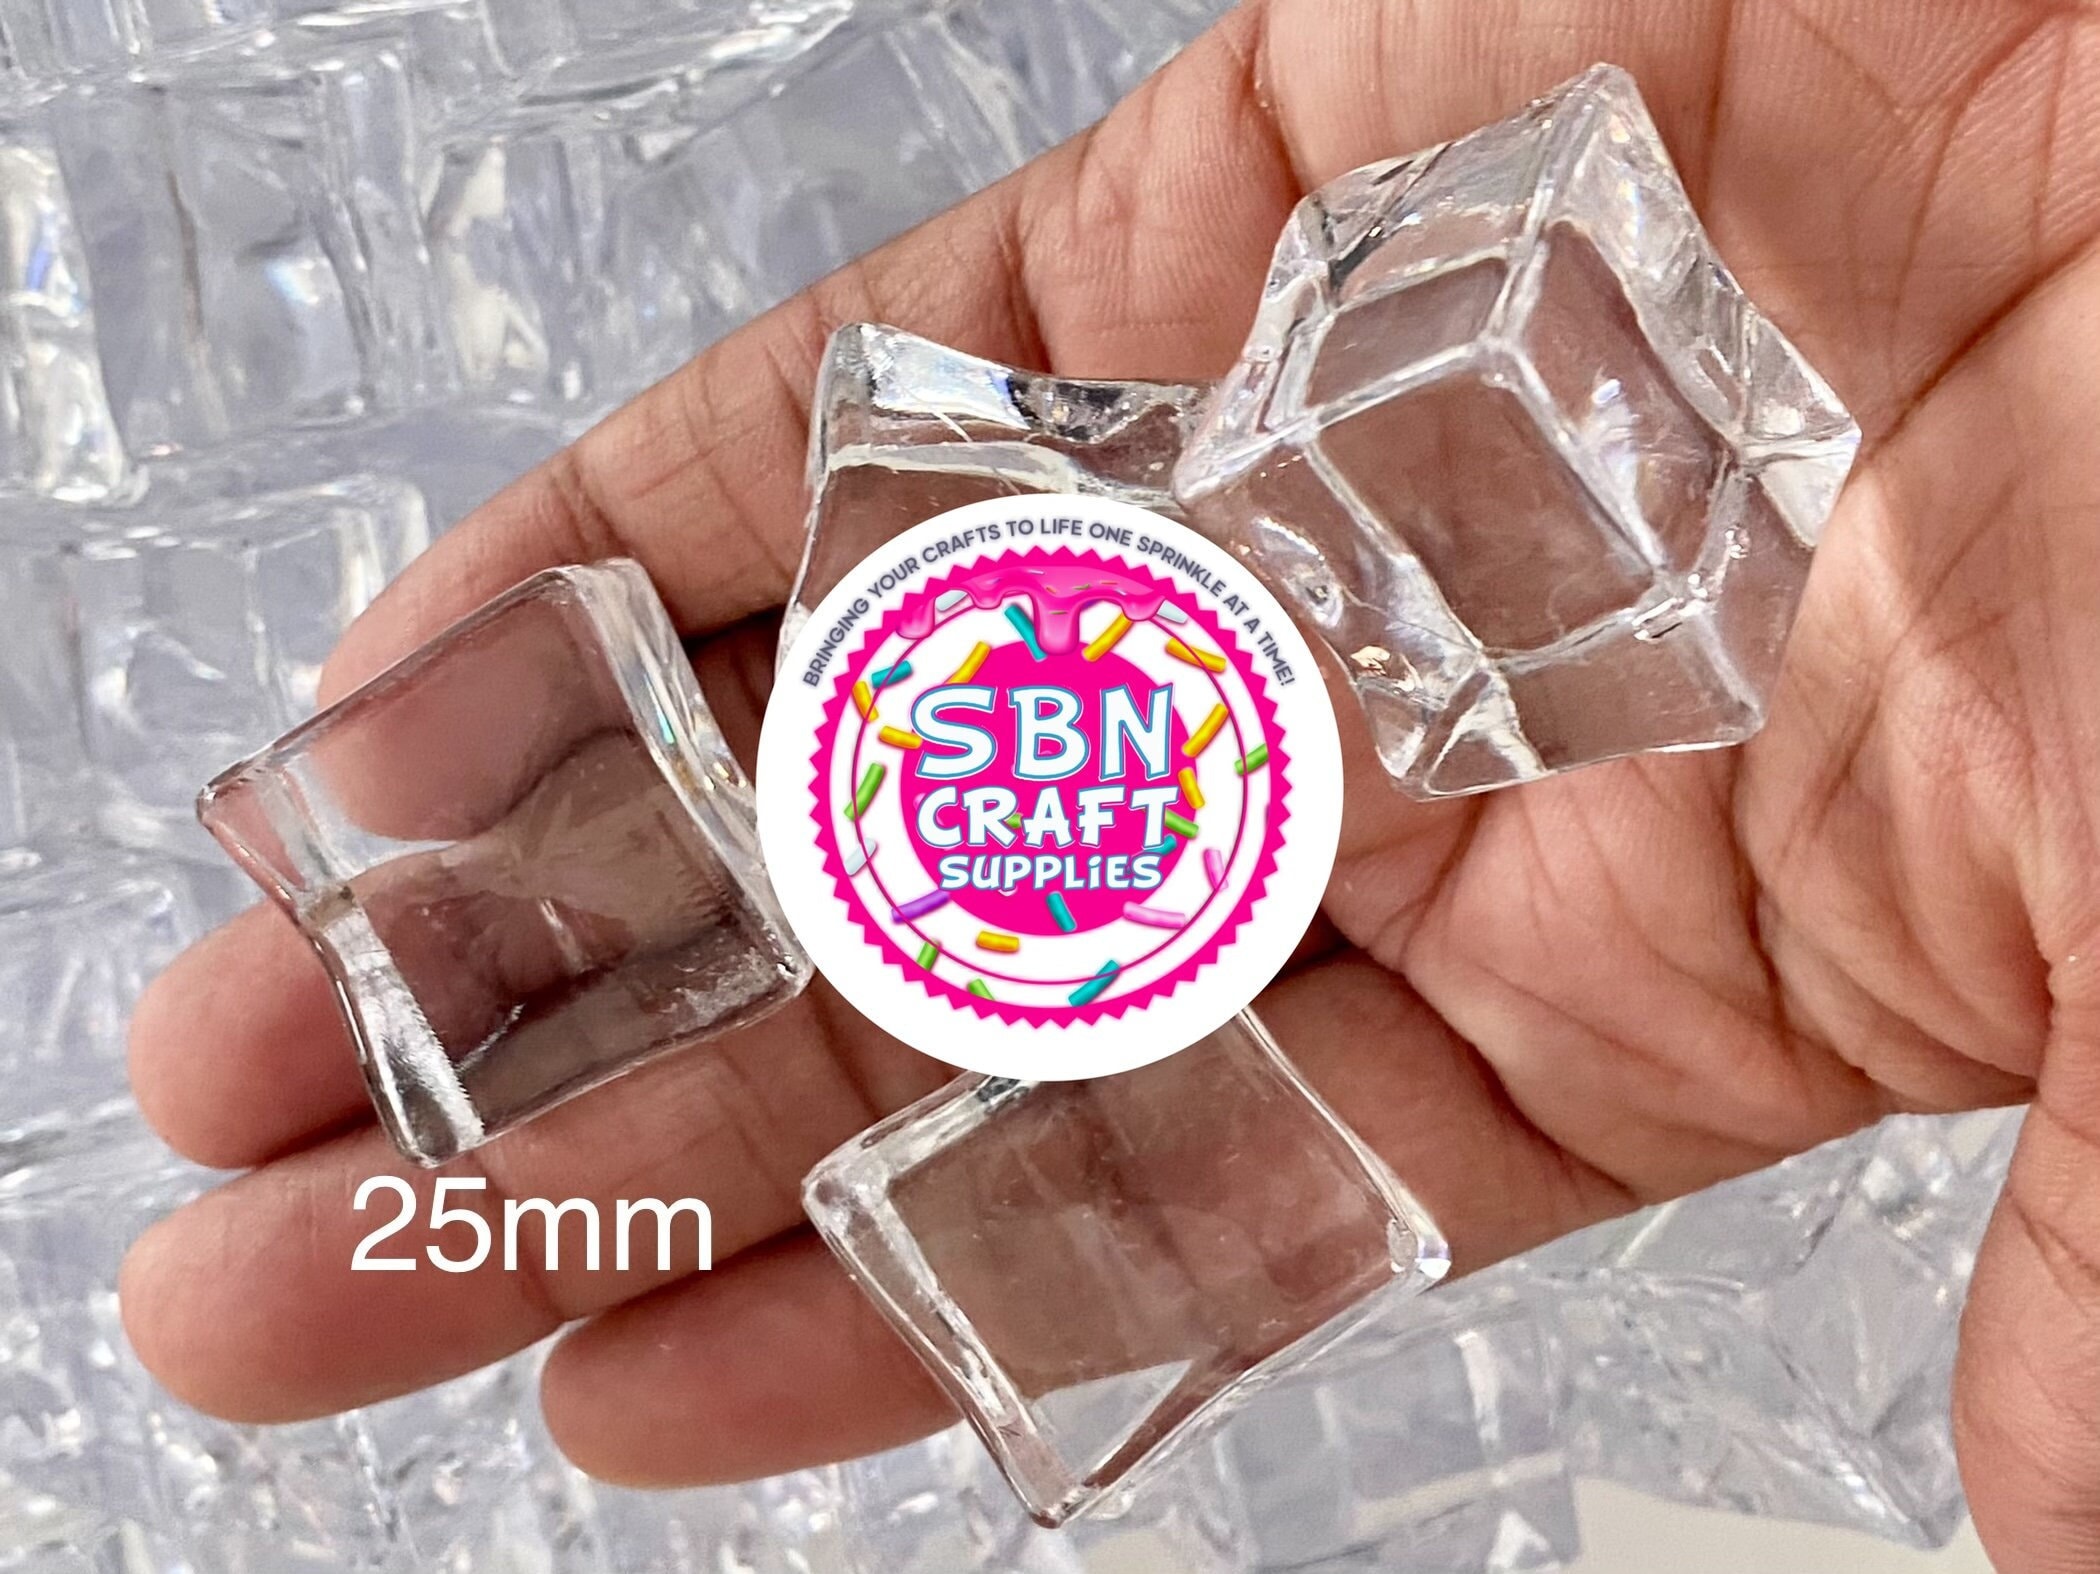 Resin CLEAR ICE CUBES Crystal Clear Transparent Ice Cubes for